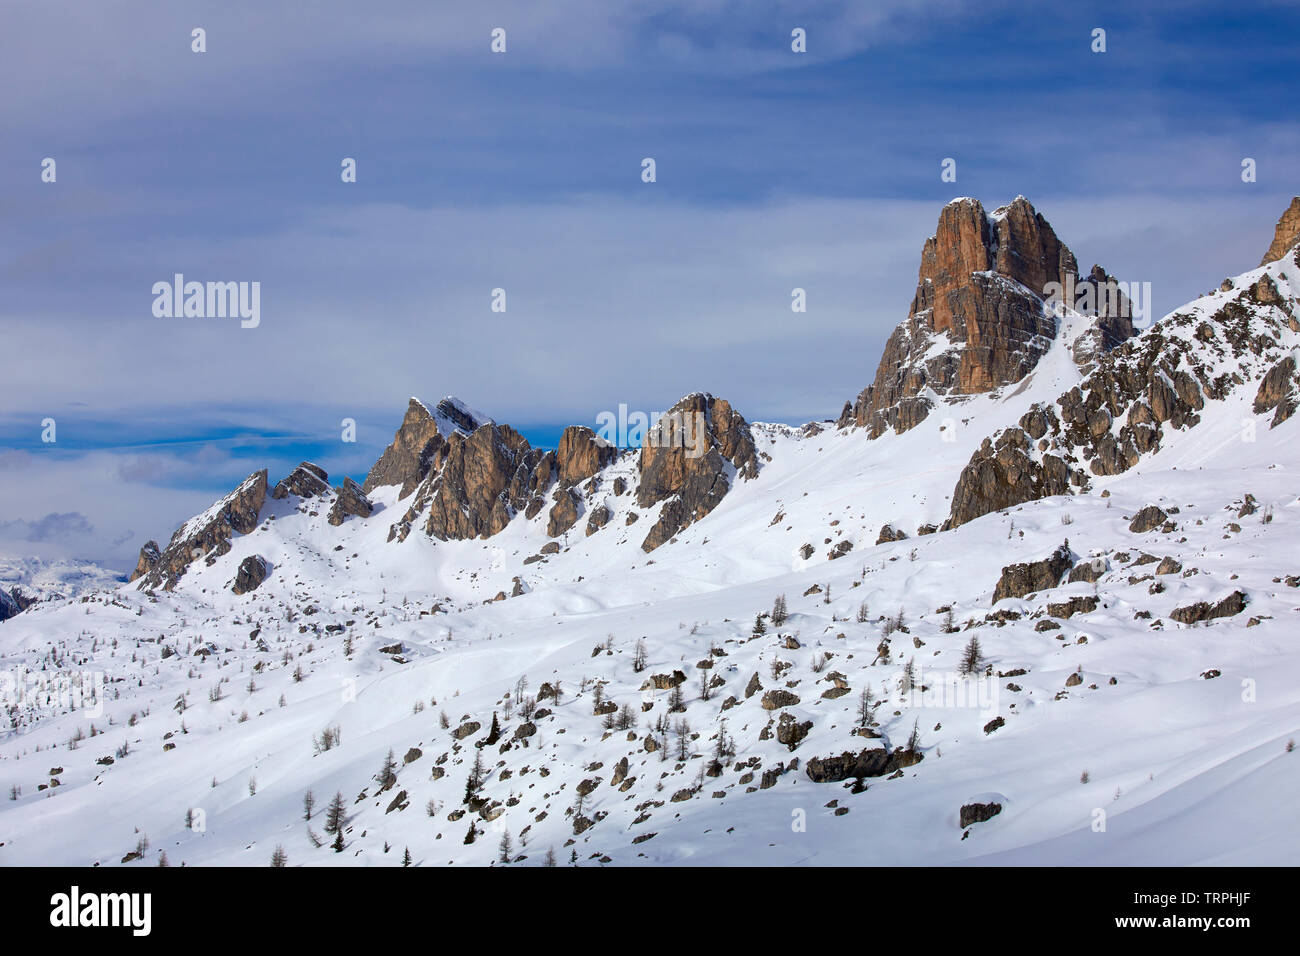 Landscape of Dolomites mountain covered by snow, Belluno province, Italy Stock Photo